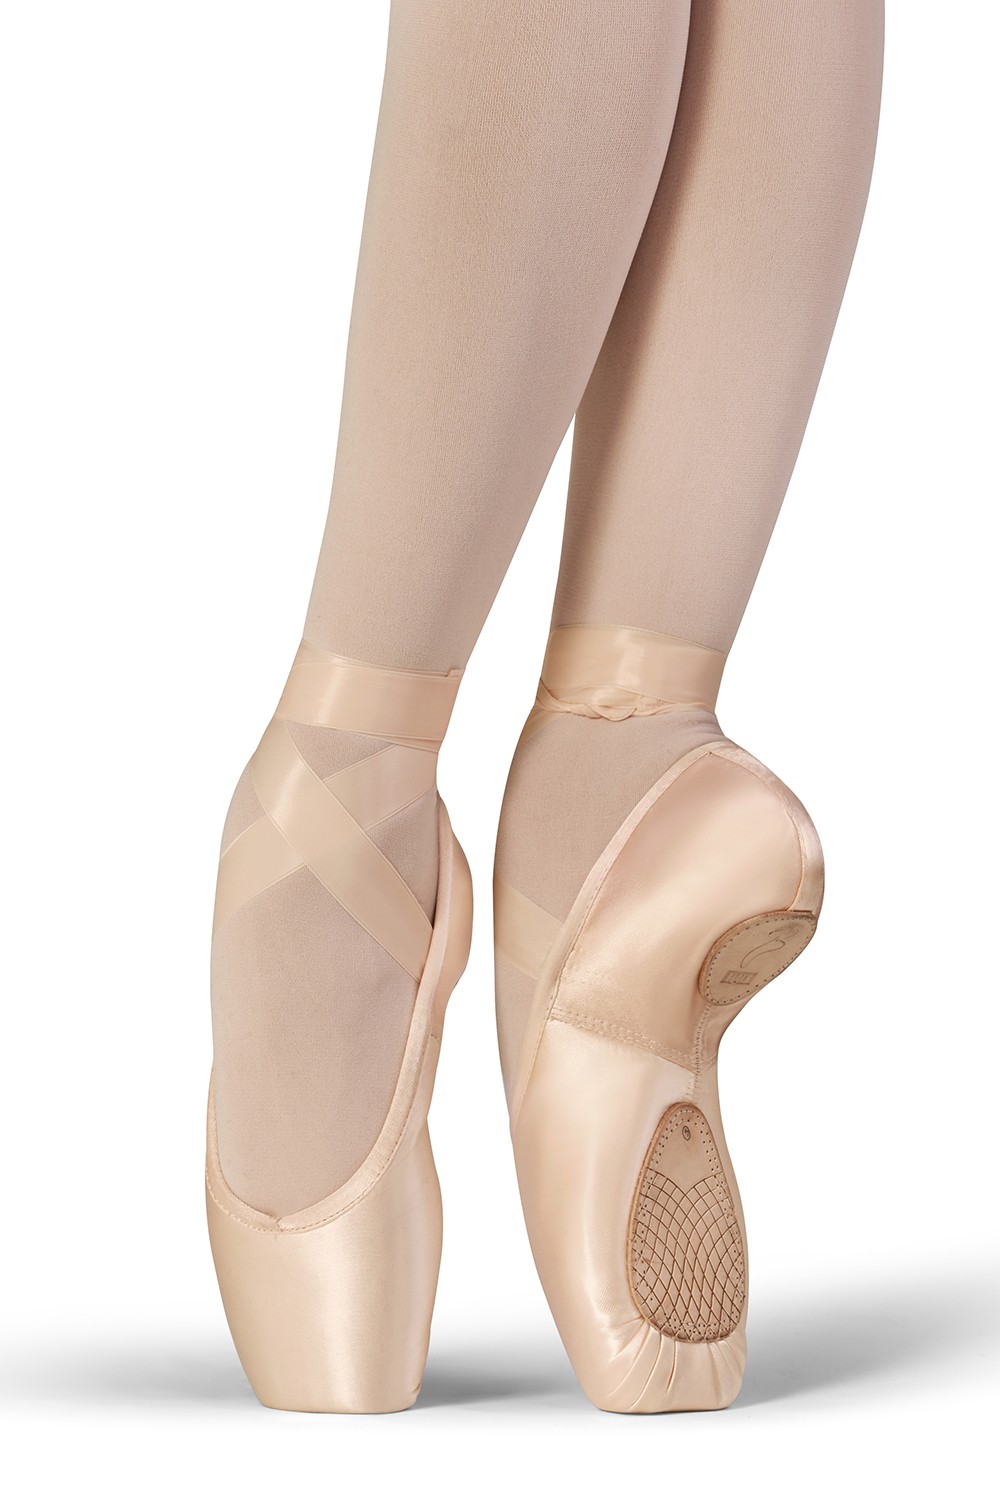 How To Choose The Right Pointe Shoe For Ballet Dancing 